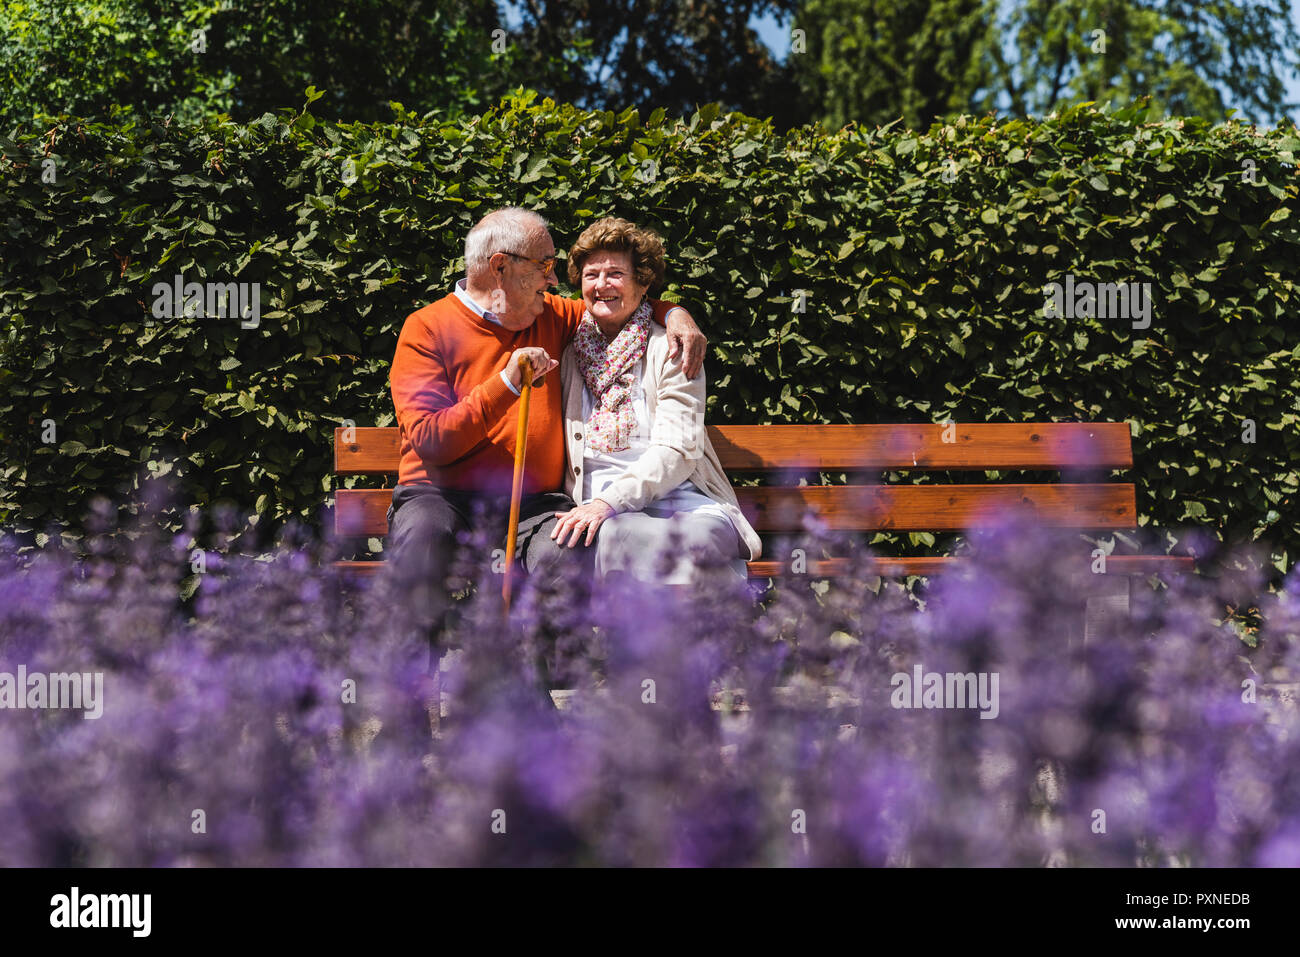 Senior couple sitting on bench in a park, falling in love Stock Photo